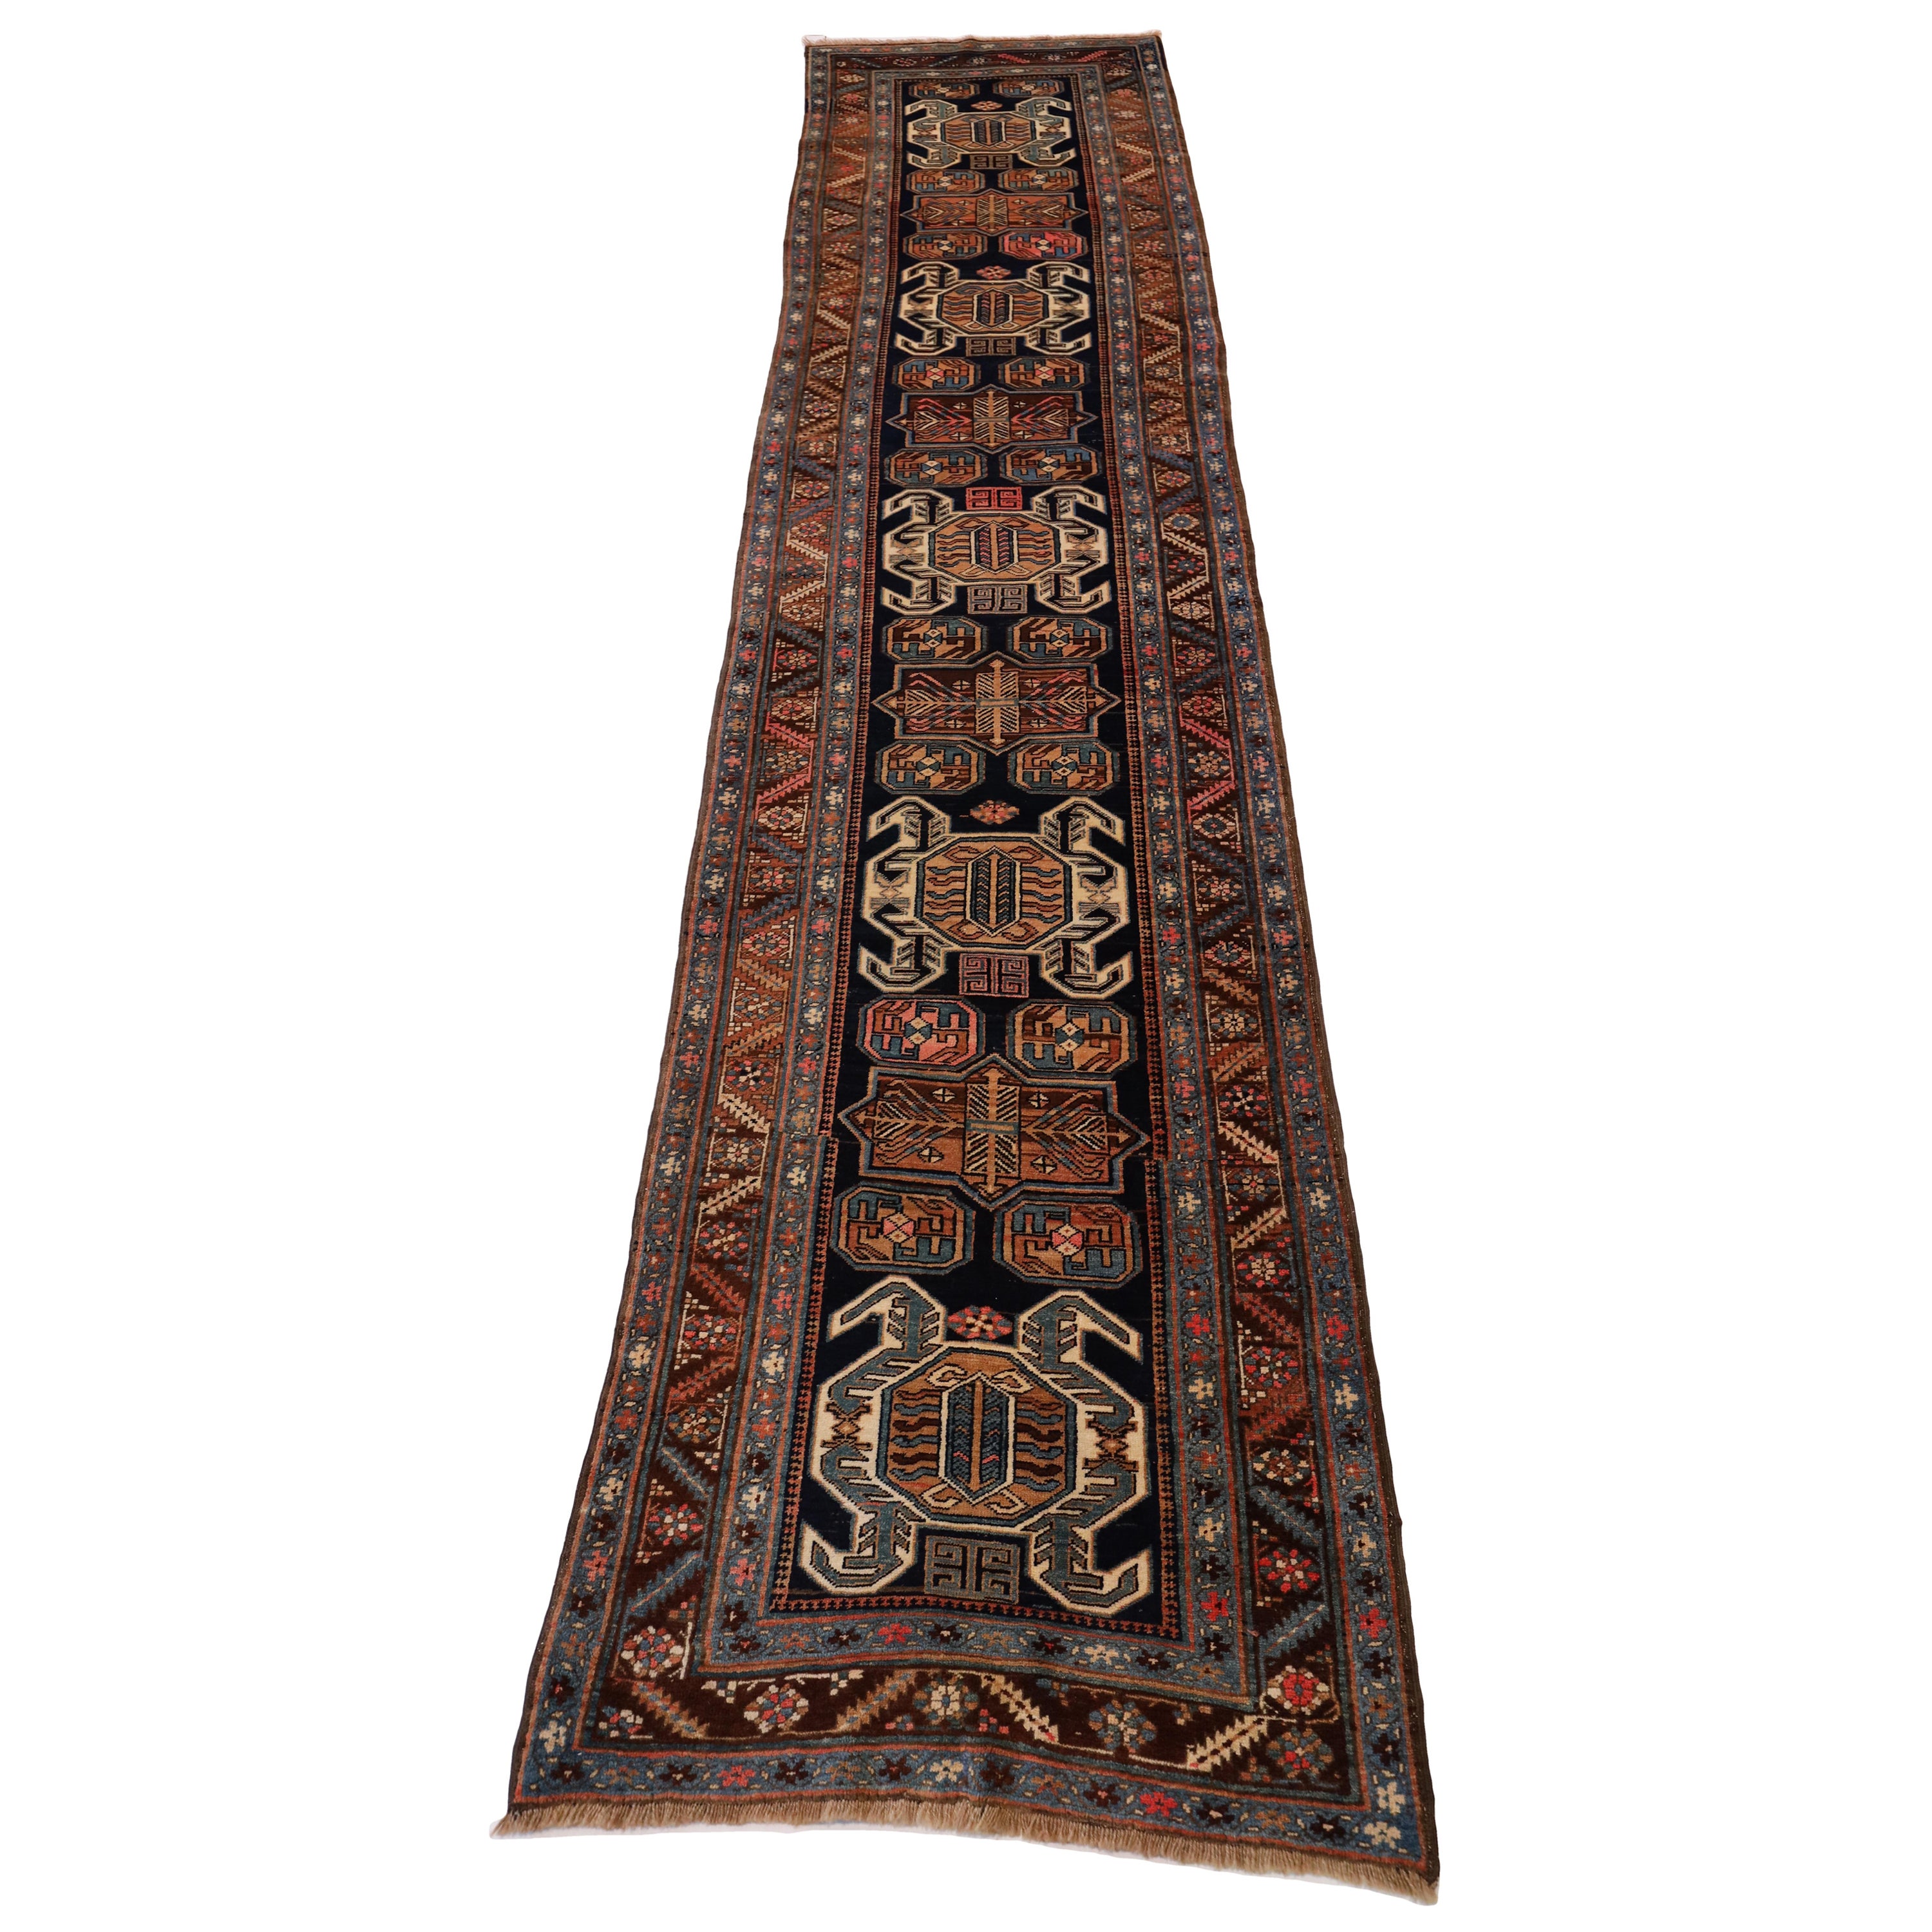 North-Western Persian Antique runner - 3'3" x 14'1"